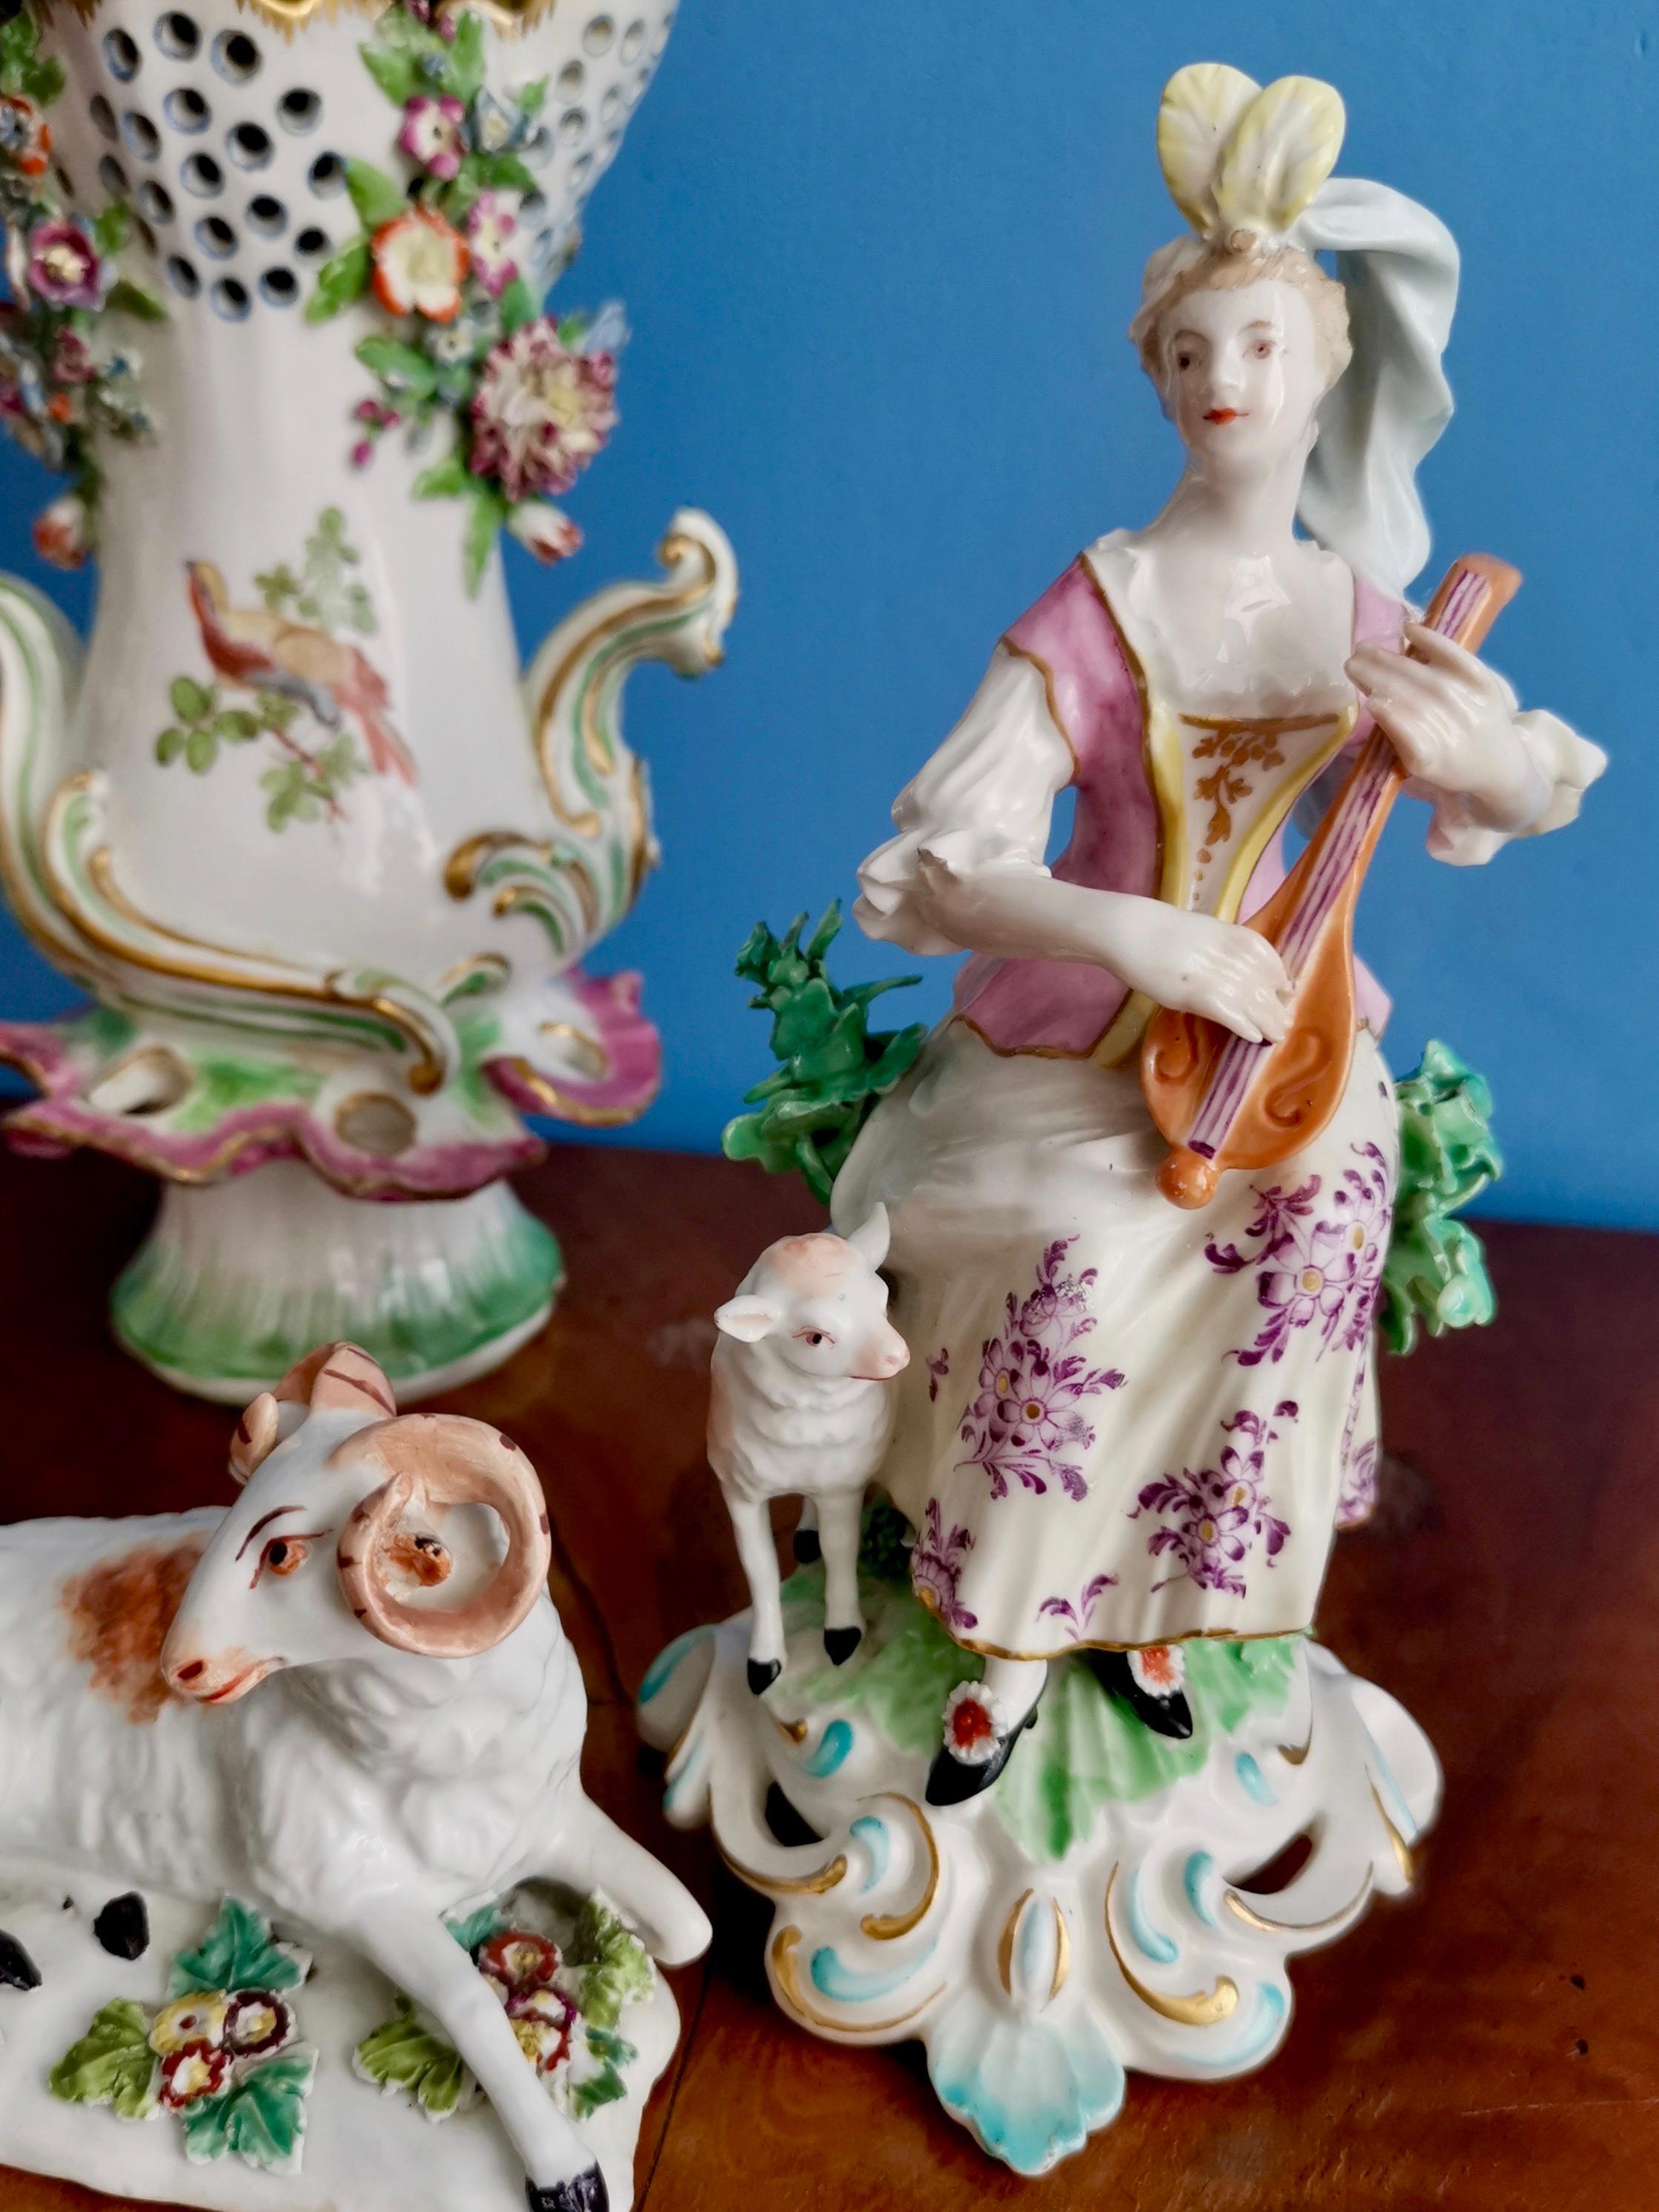 This is a beautiful Chelsea-Derby figure of a lady with a lute made in circa 1770. This figure had been issued previously by Derby (in the early 1760s) and this is a re-issue from the early period when Derby had bought the Chelsea factory. The